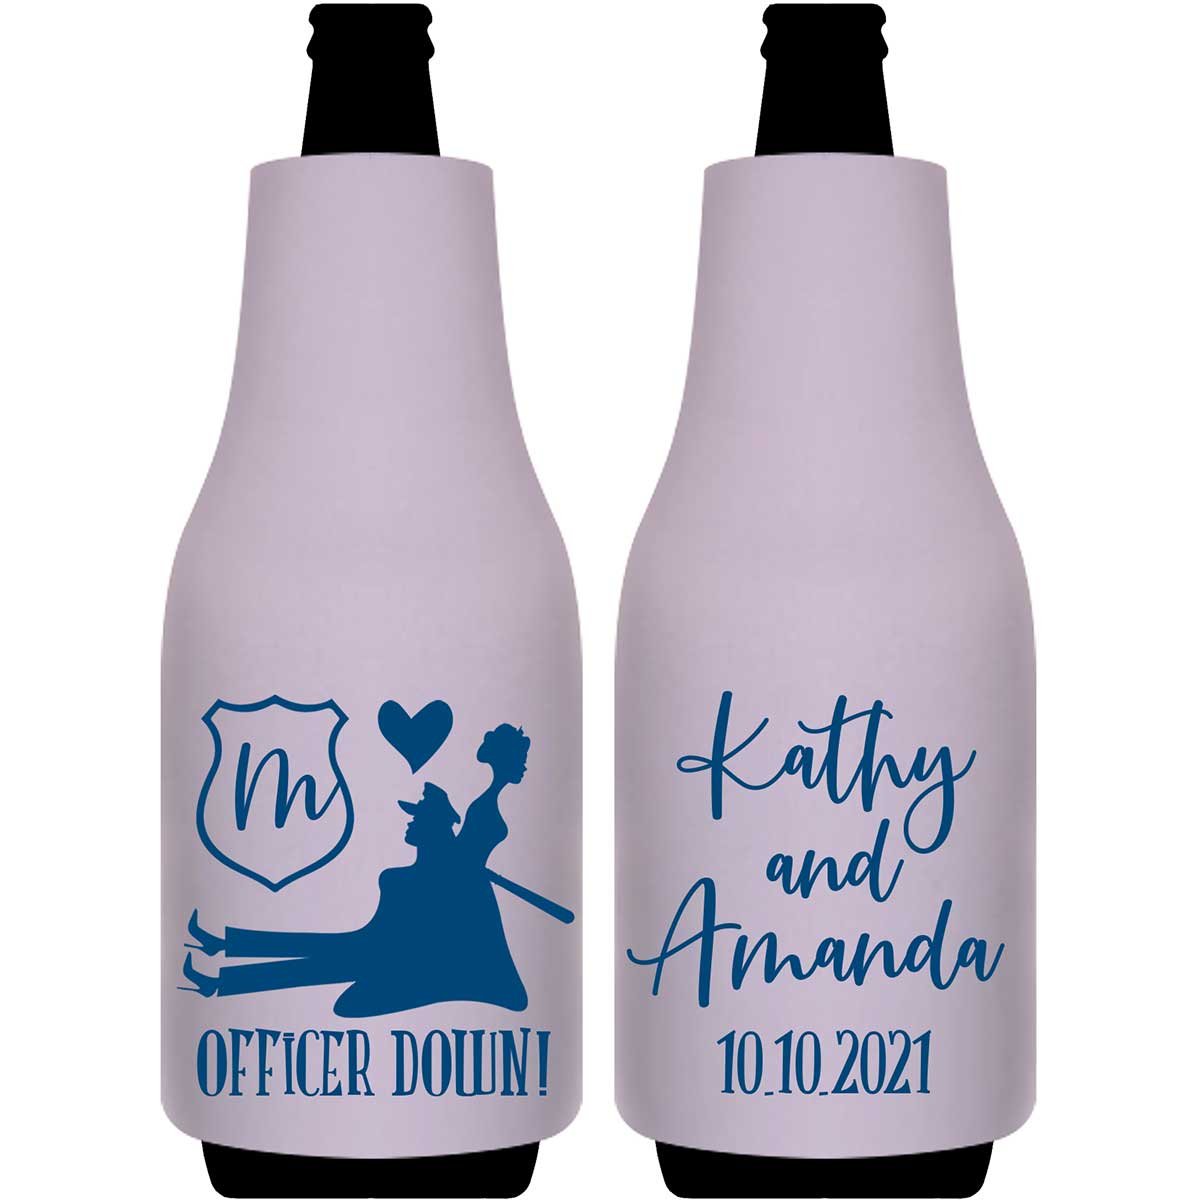 Officer Down 2A Lesbian Cop Wedding Foldable Bottle Sleeve Koozies Wedding Gifts for Guests